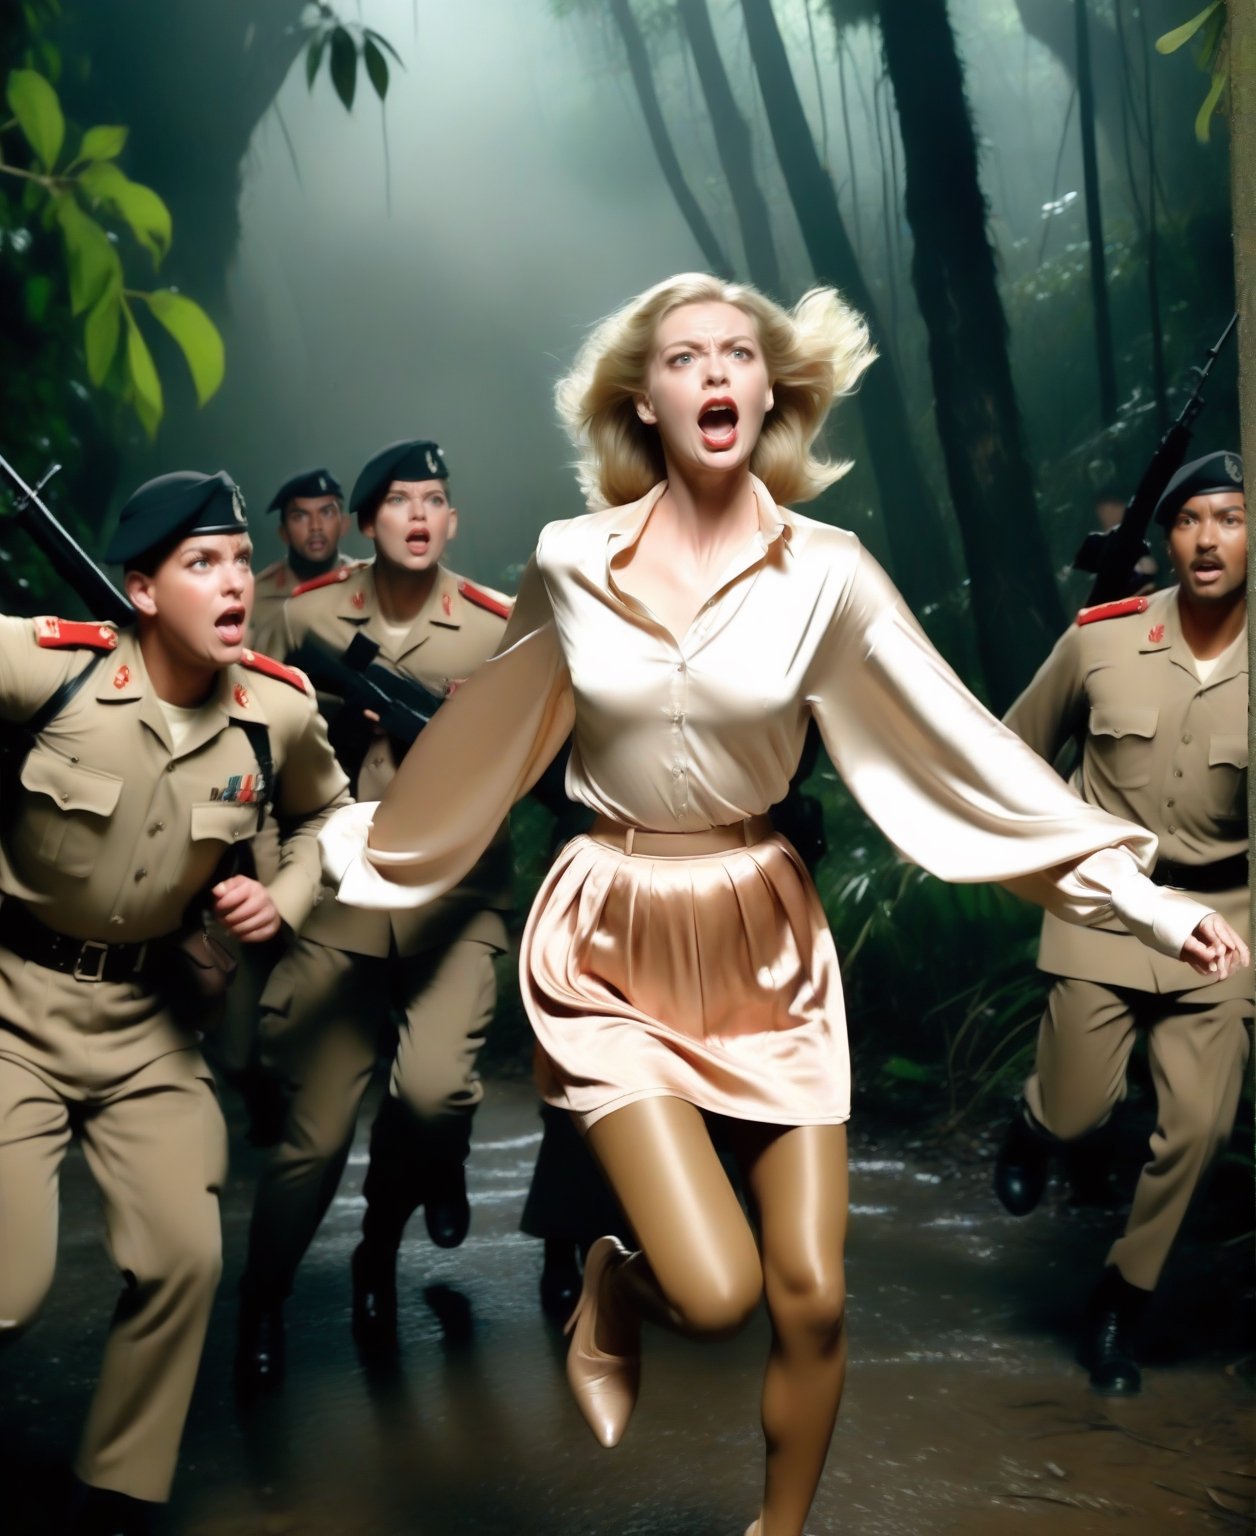 once upon a time, Soldiers attack over a blonde england woman, she is wearing a puffy long sleeve satin blouse, she is wearing a silk neck scarf, she is wearing a knee_long silk skirt, she is wearing pantyhose and high heels, she is startled and tries to run away, realistic, detailed, horror movie style, night hot jungle, surreal, masterpiece, attacked by Soldiers